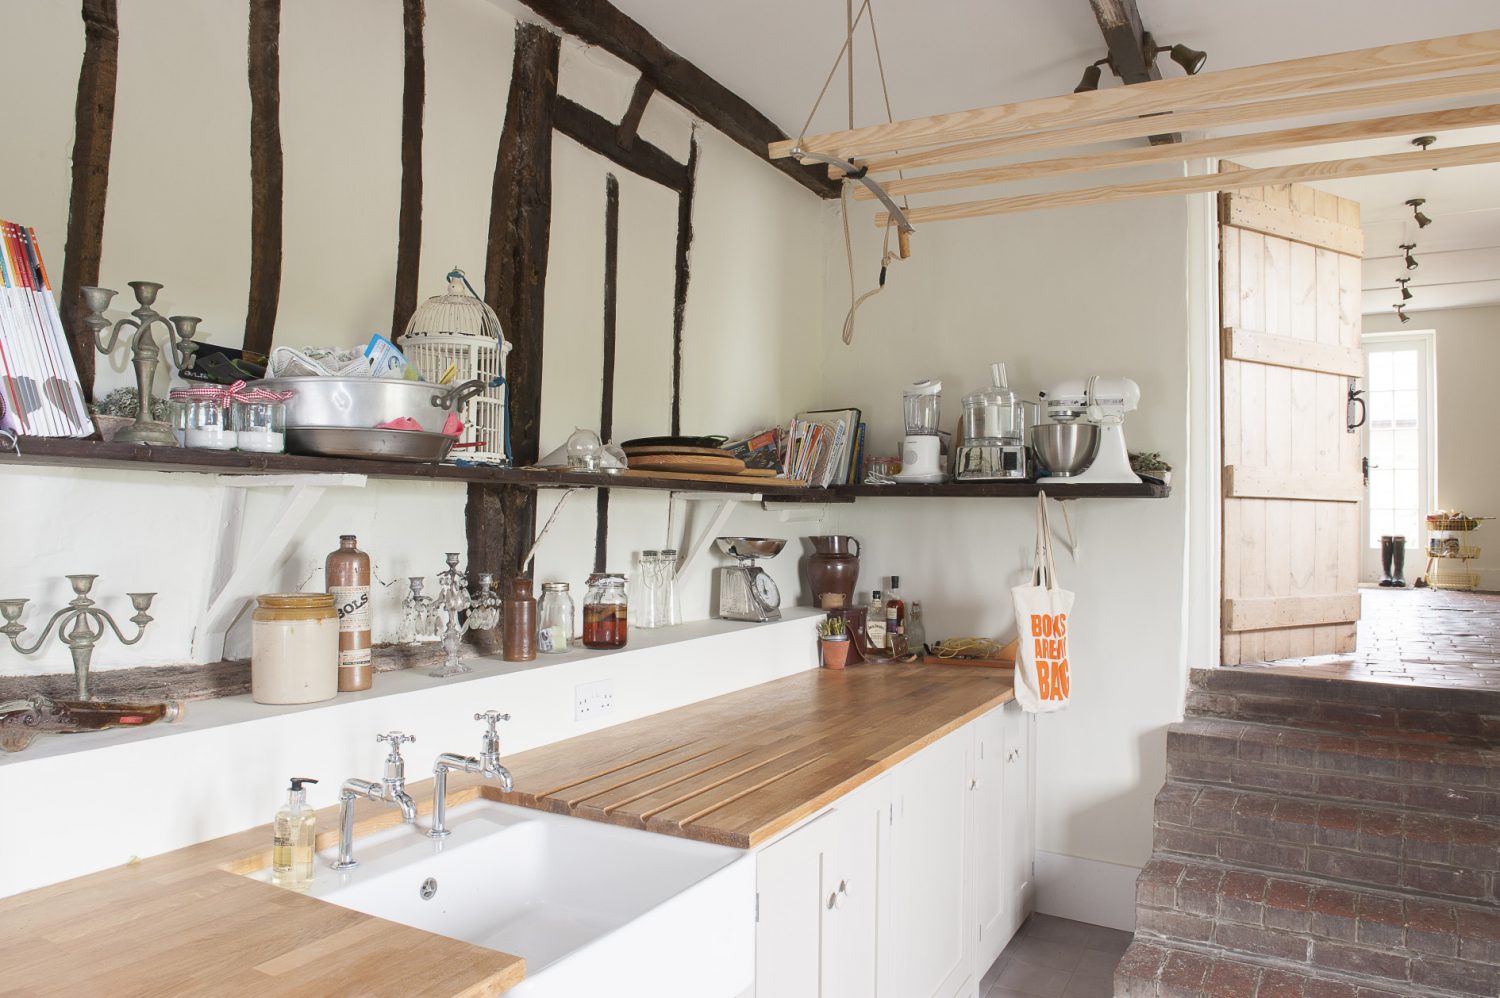 The utility room was in a pretty sorry state when the couple first moved in. It now serves as a storage space for preserves and other perishable kitchen items